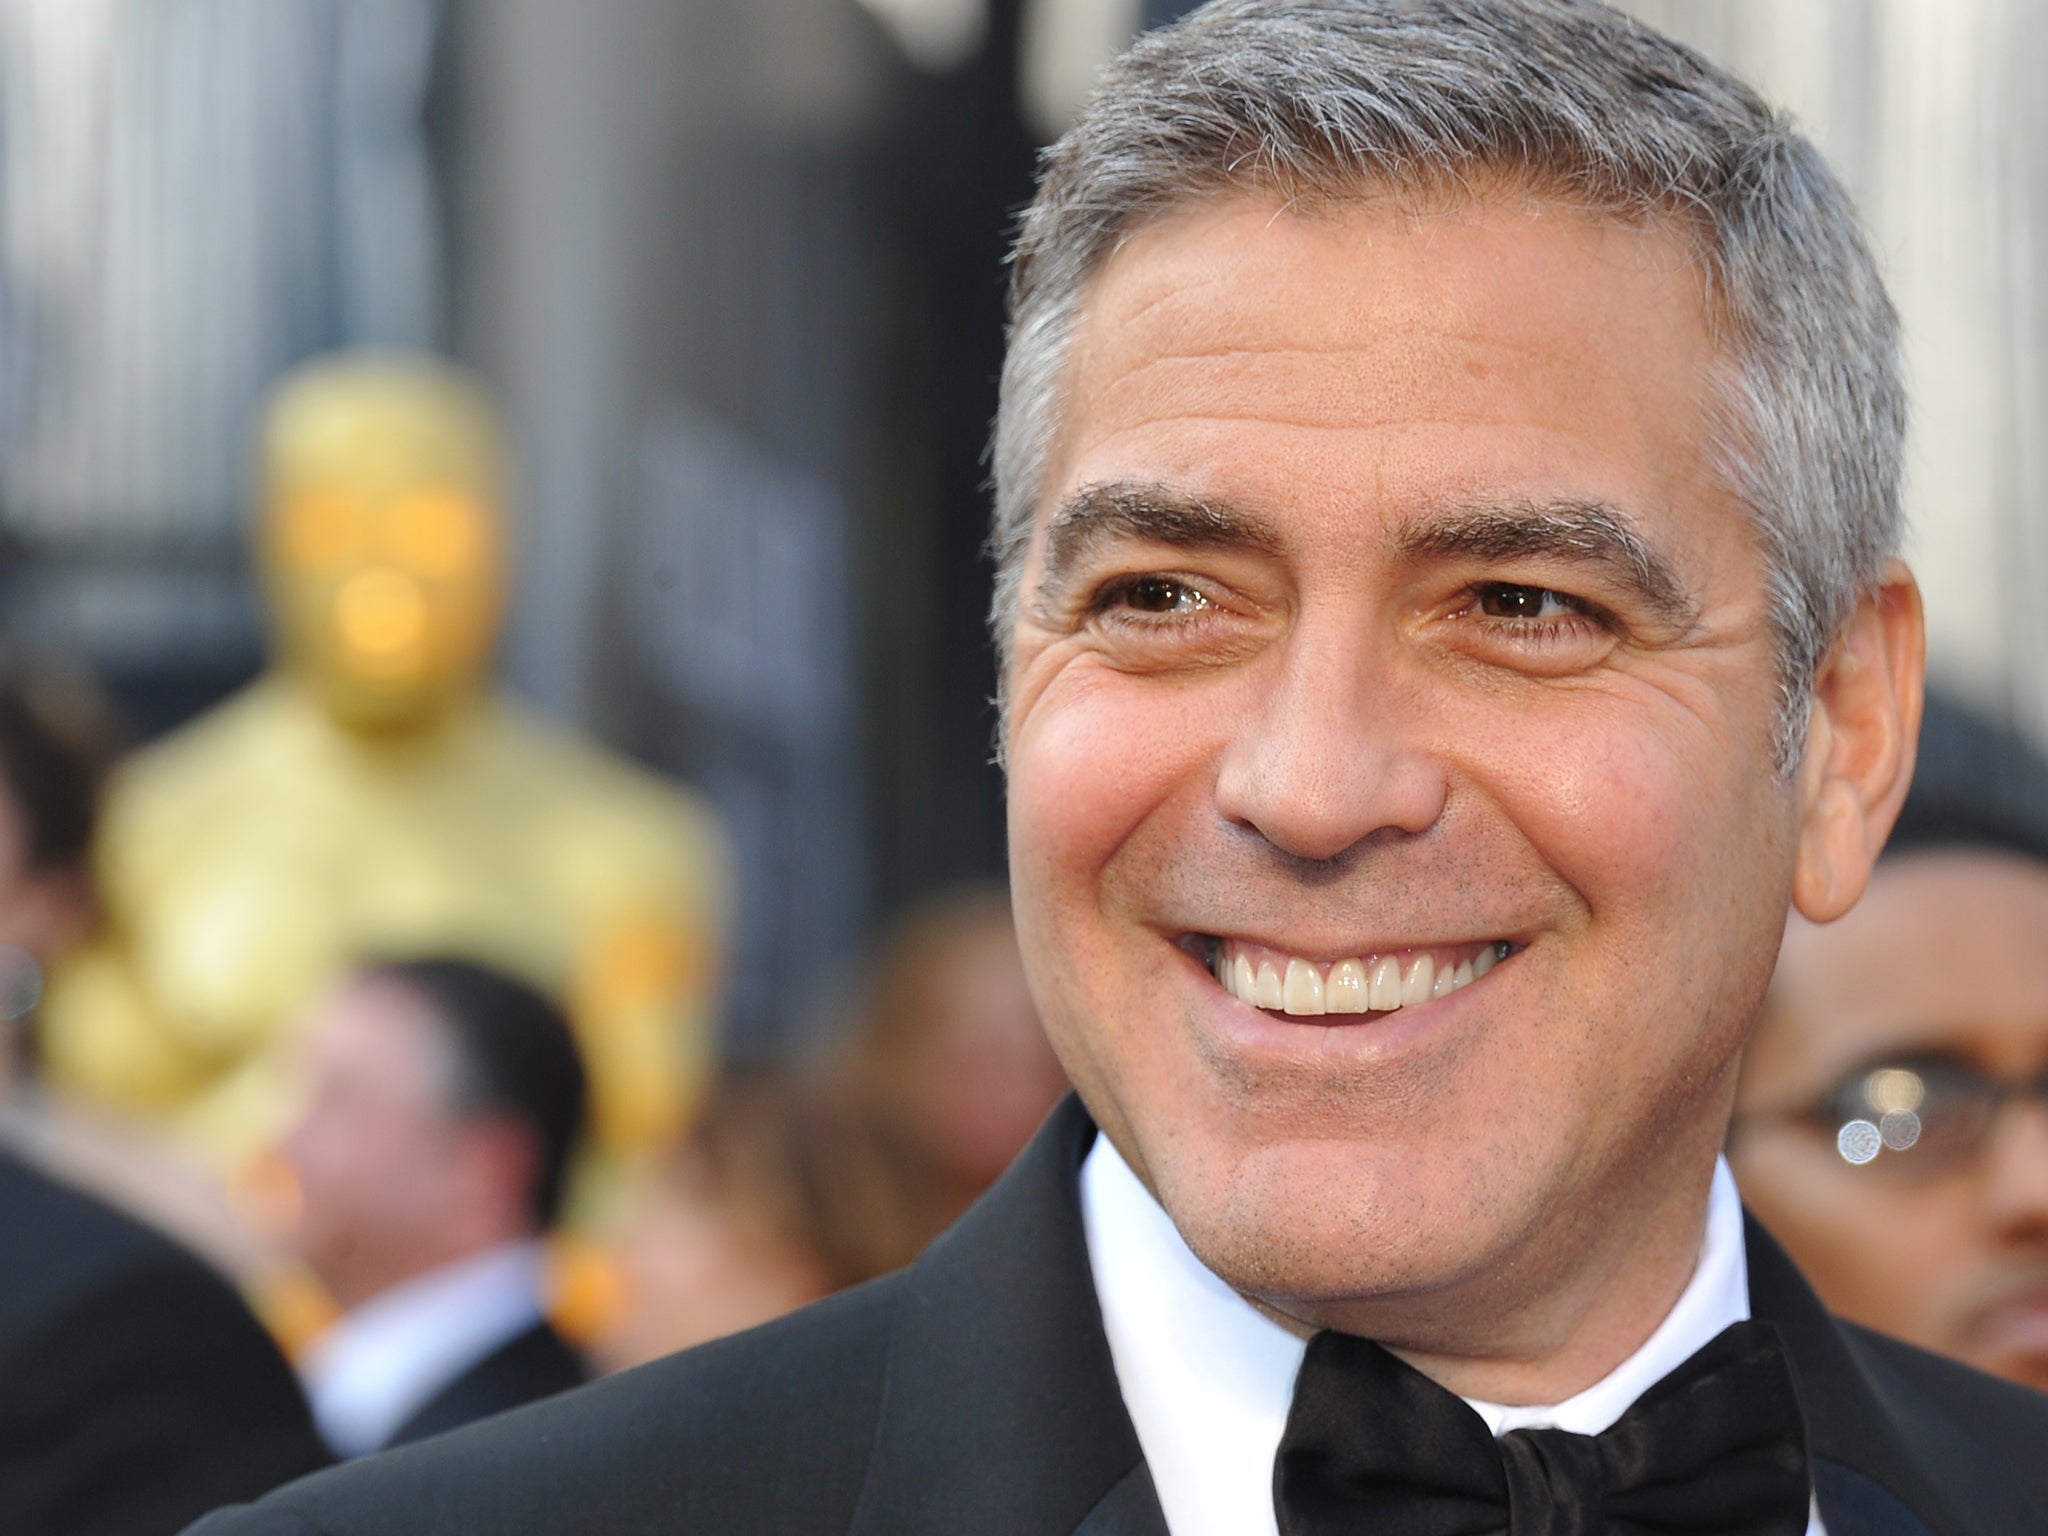 George Clooney is set to go in for a kiss with the Dowager Countess - much to her surprise